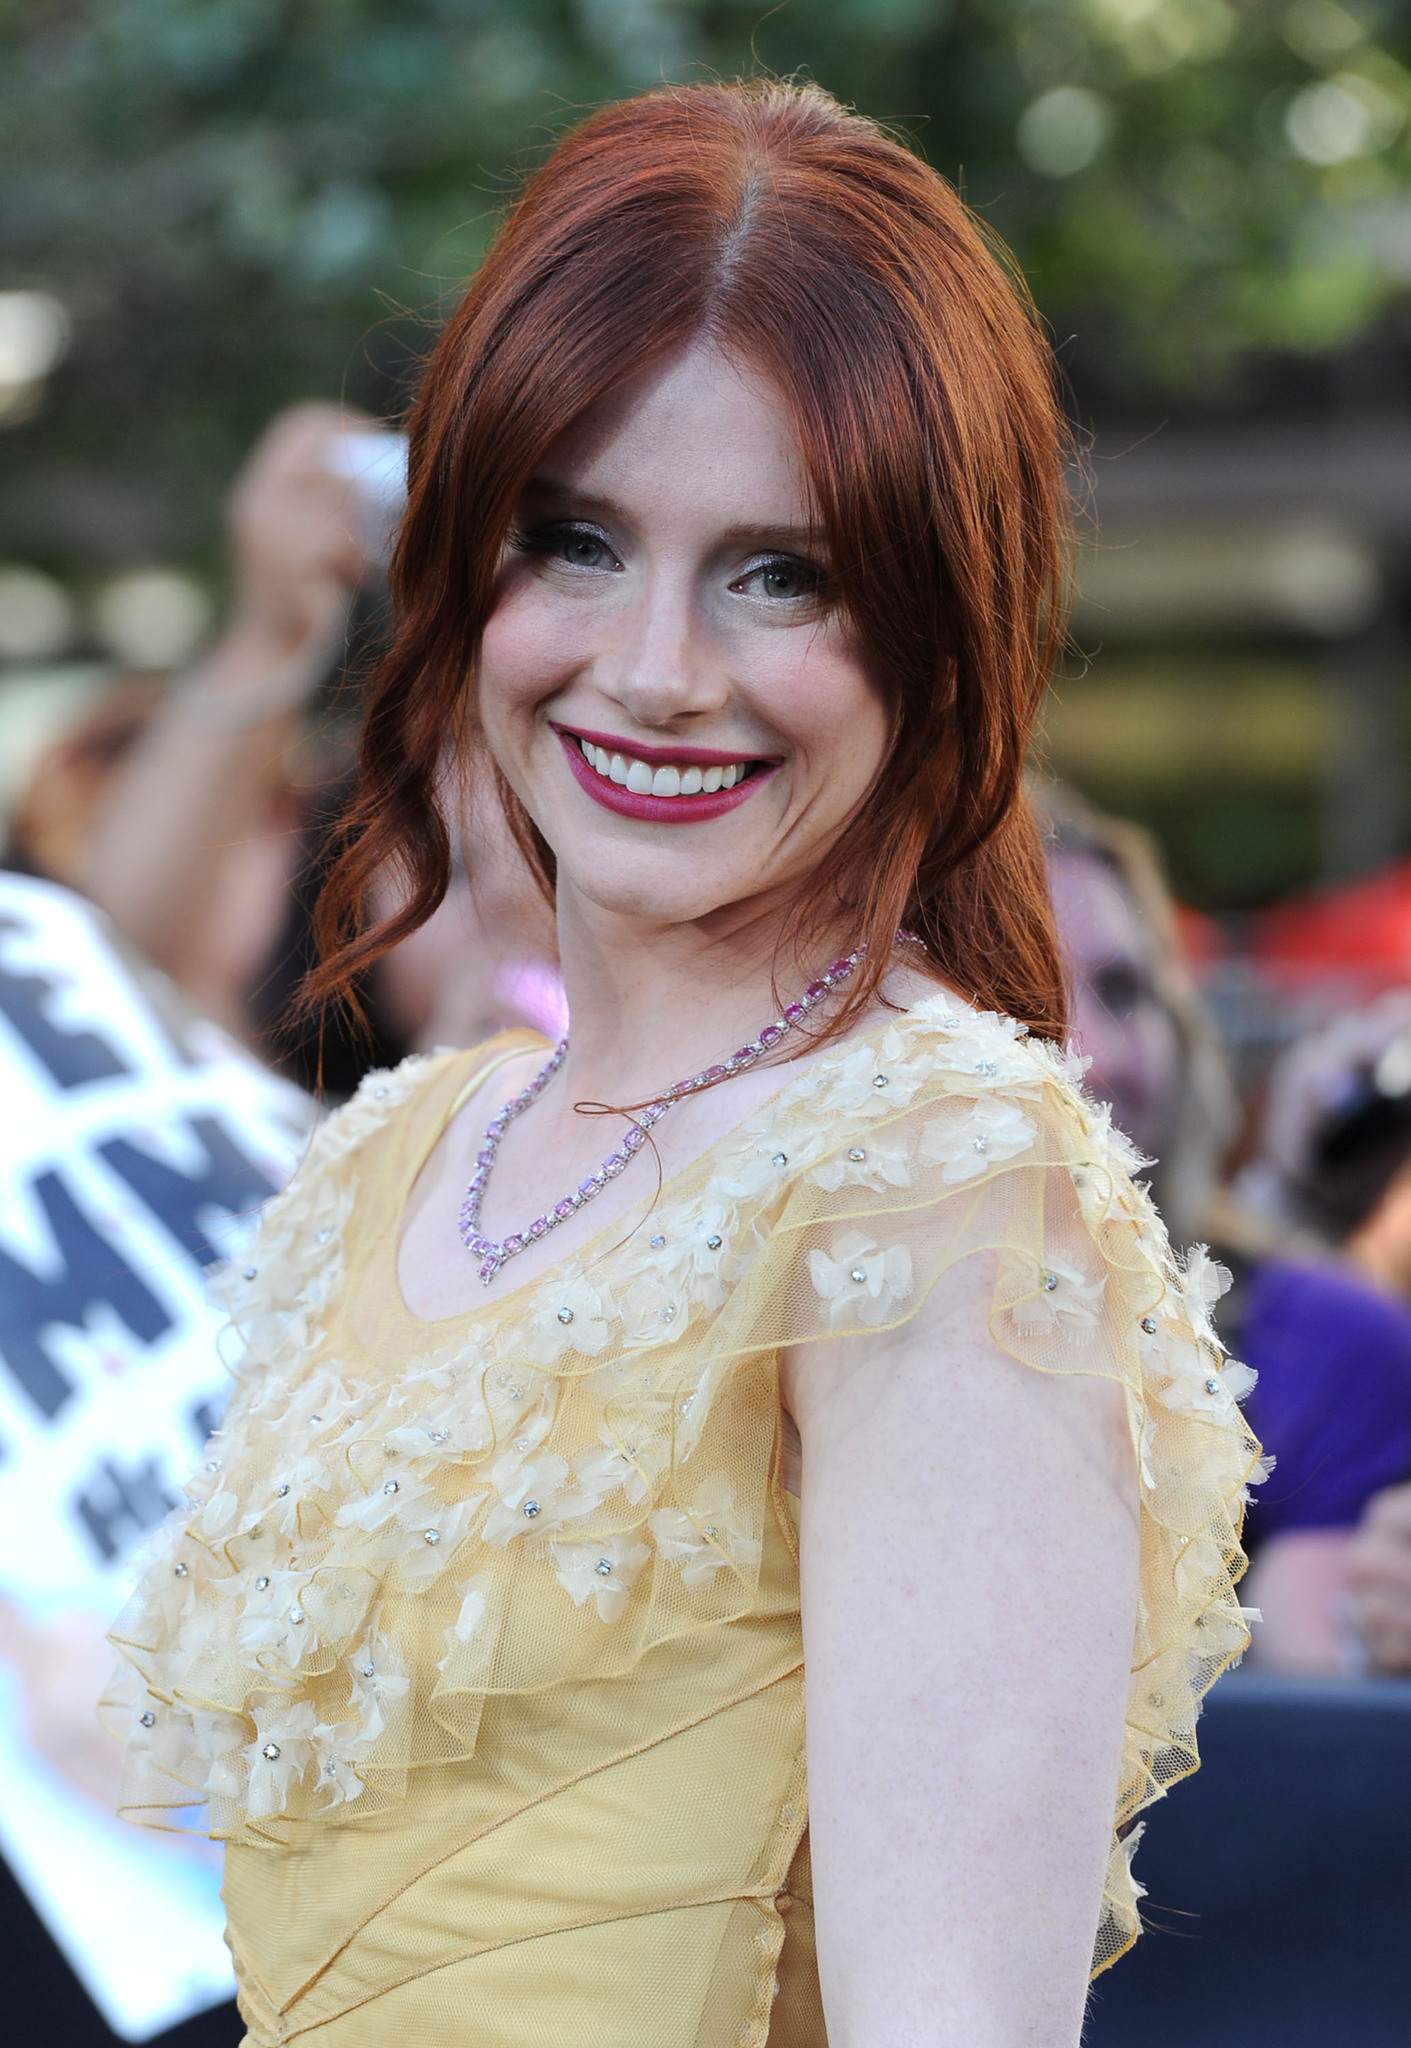 Bryce Dallas Howard at event of The Twilight Saga: Eclipse (2010)